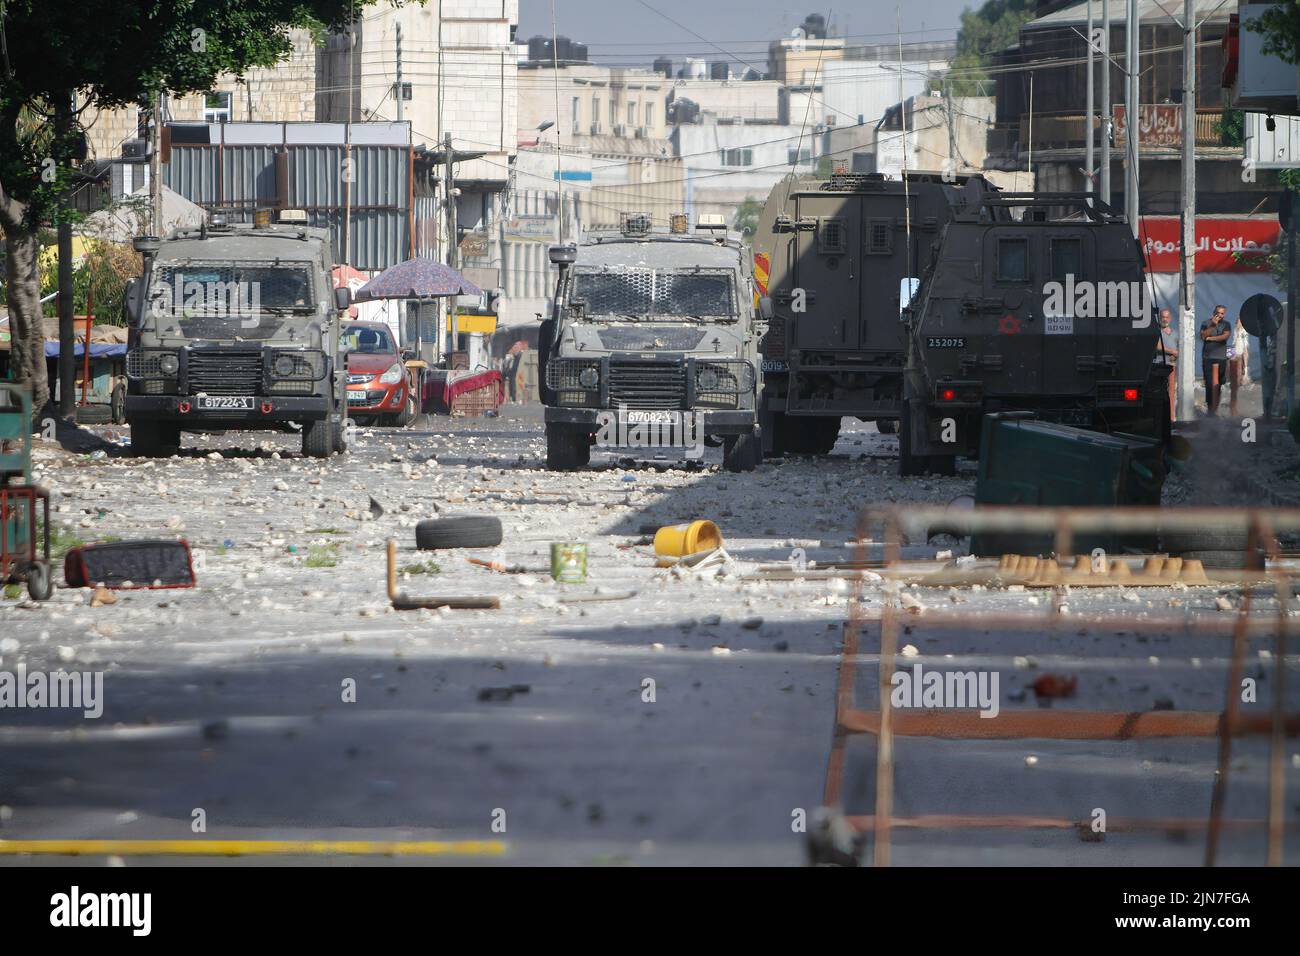 Military vehicles belonging to the Israeli army block the main street during the clashes with Israeli army forces after a raid in the Old City of Nablus in the occupied West Bank, the Palestinian Ministry of Health said that 3 Palestinians killed during the raid. (Photo by Nasser Ishtayeh / SOPA Images/Sipa USA) Stock Photo